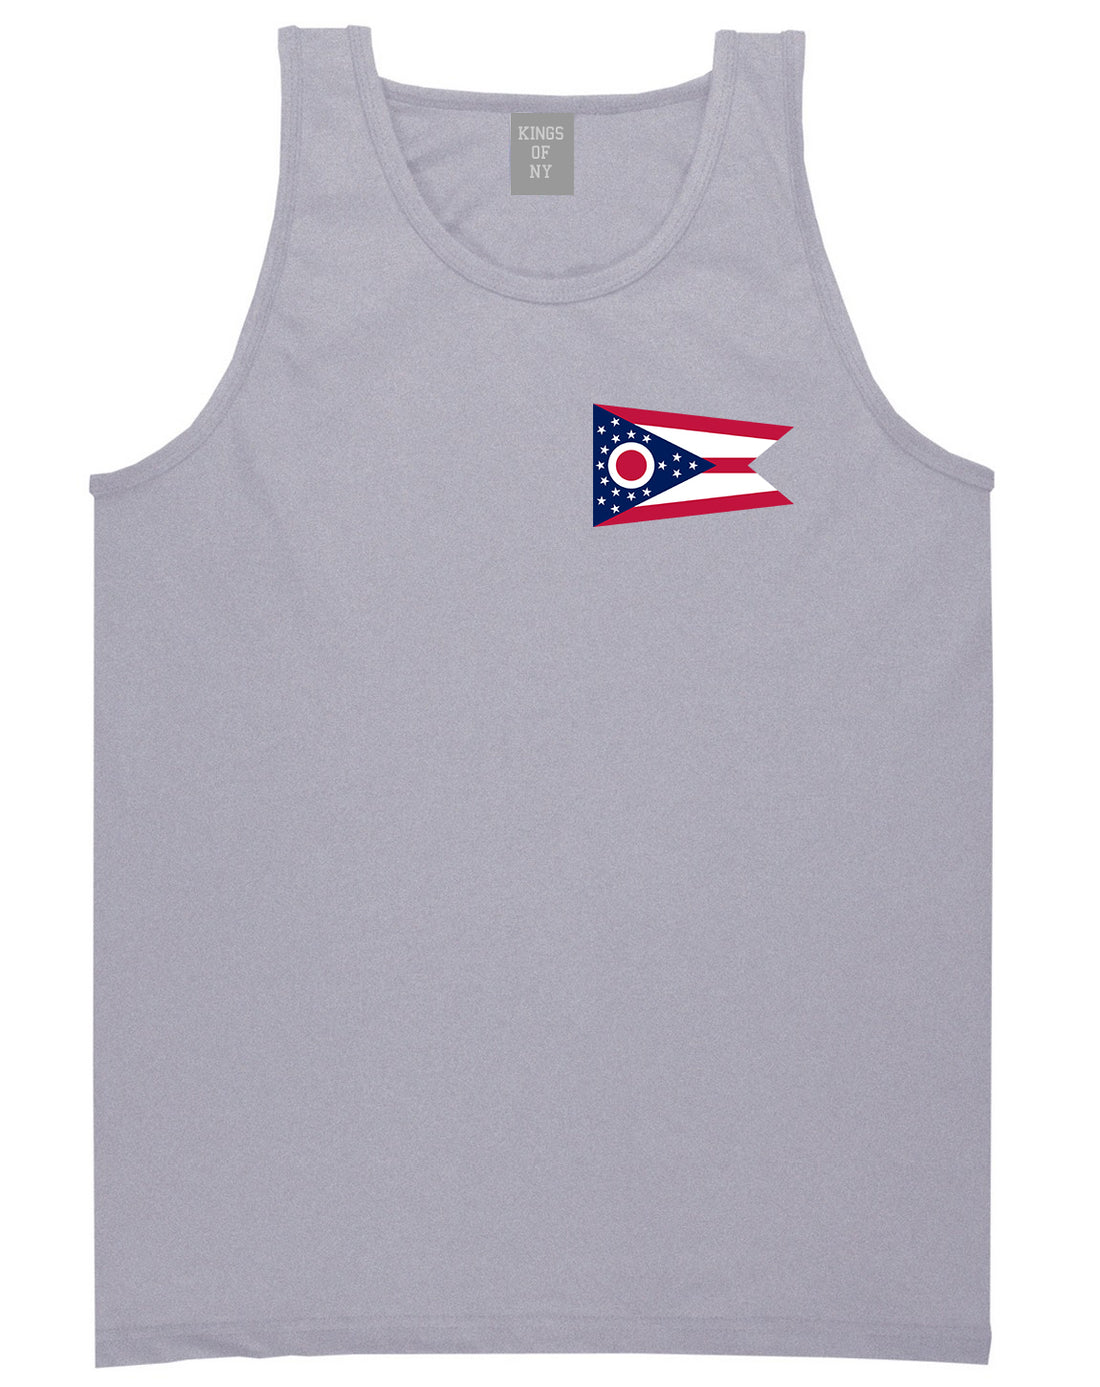 Ohio State Flag OH Chest Mens Tank Top T-Shirt Grey